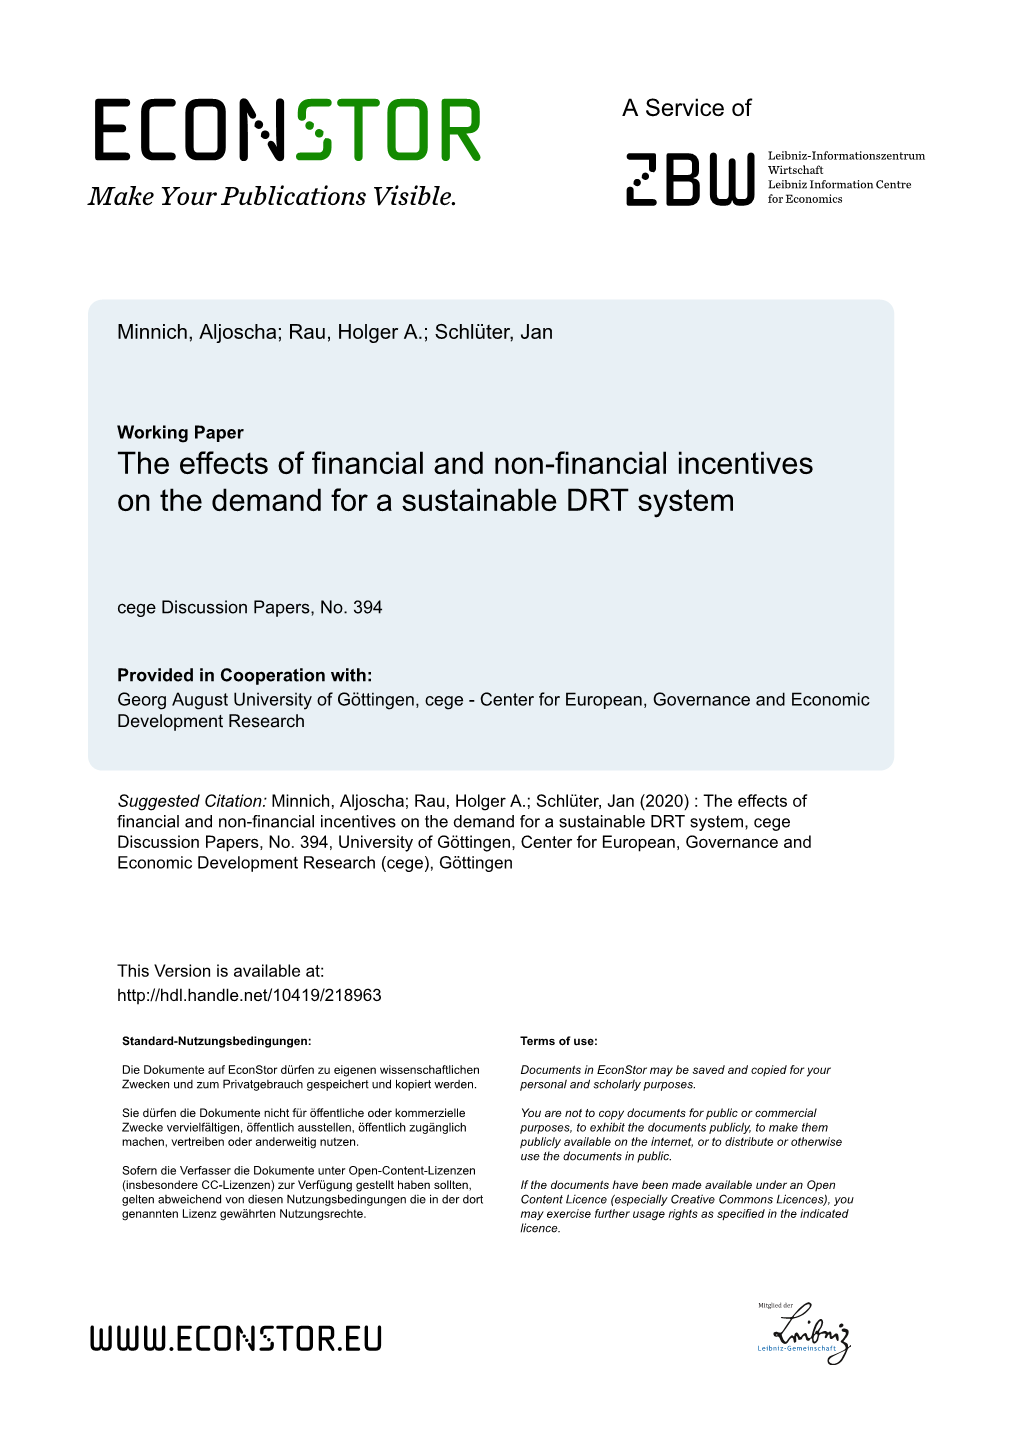 The Effects of Financial and Non-Financial Incentives on the Demand for a Sustainable DRT System